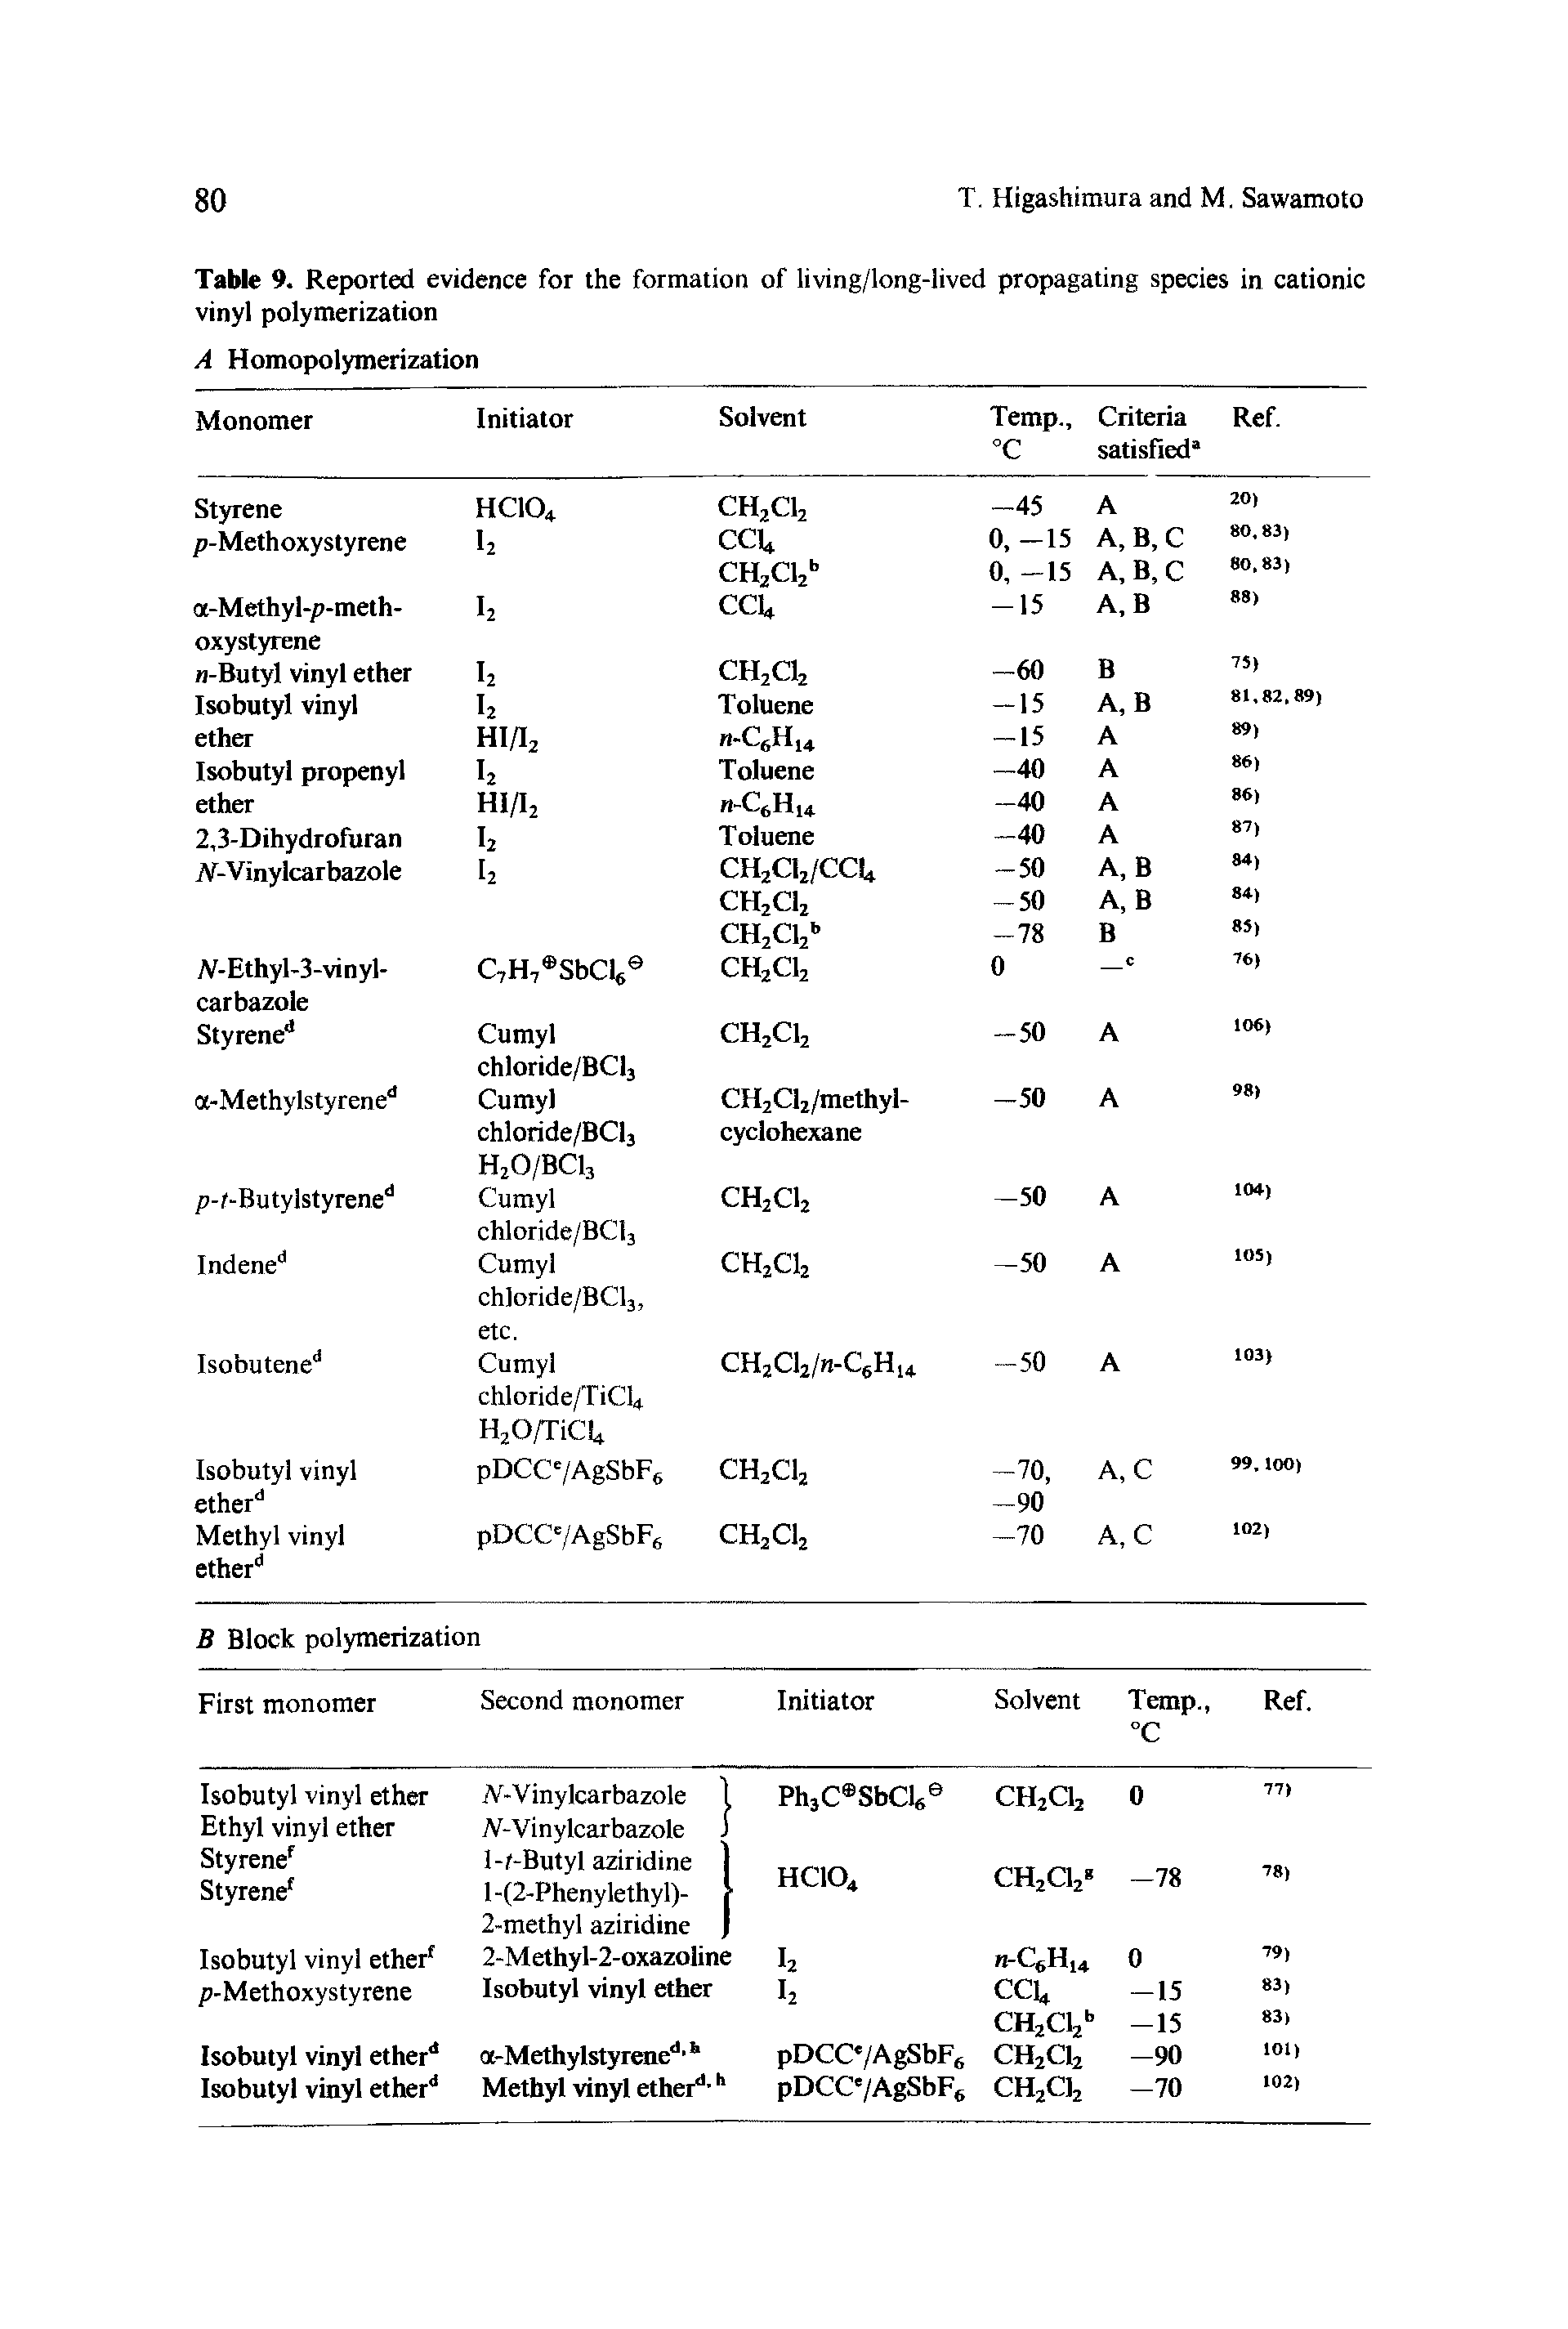 Table 9. Reported evidence for the formation of living/long-lived propagating species in cationic vinyl polymerization...